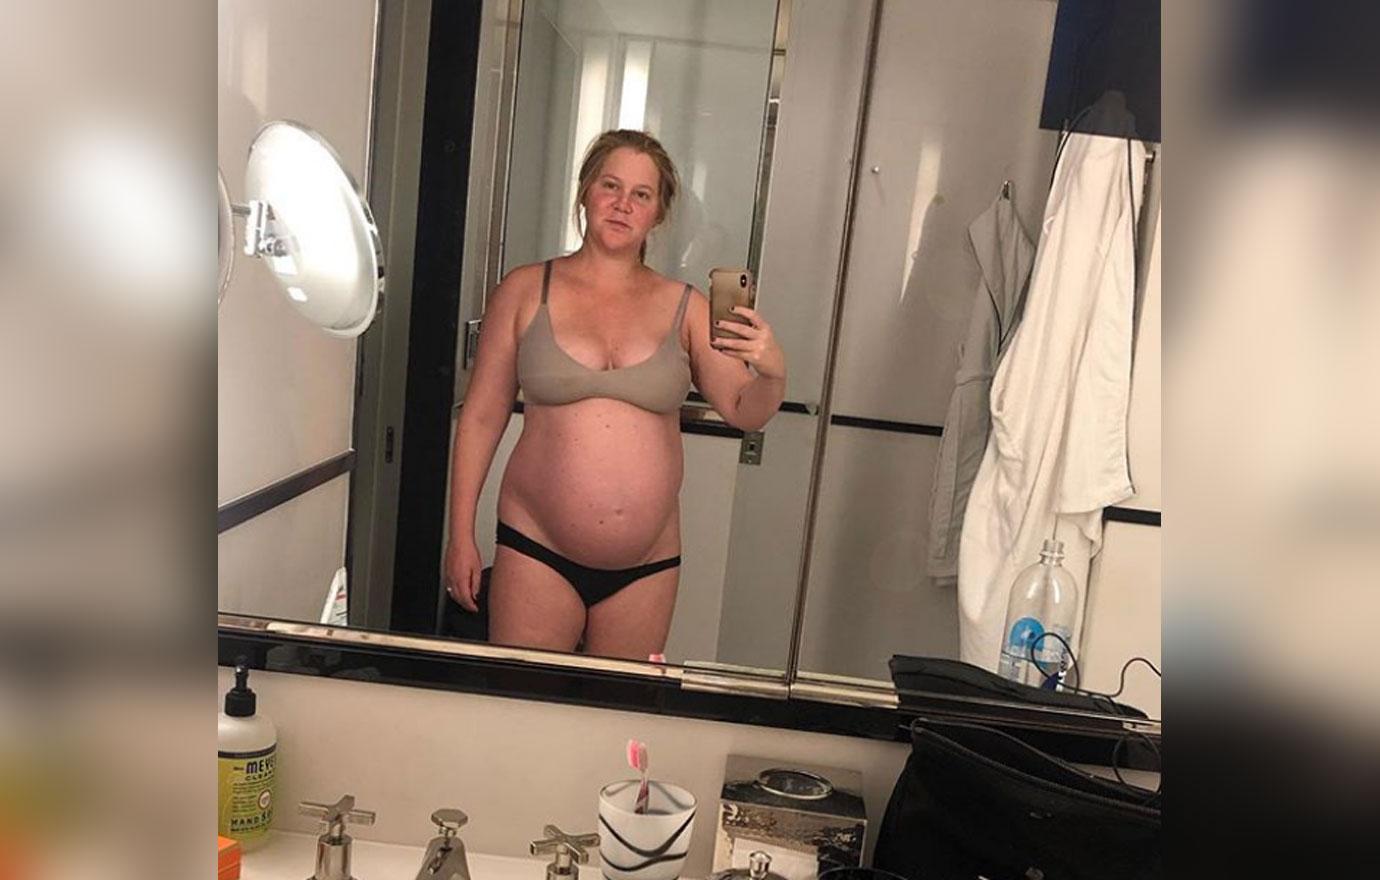 angel talarico recommends nude photos amy schumer pic